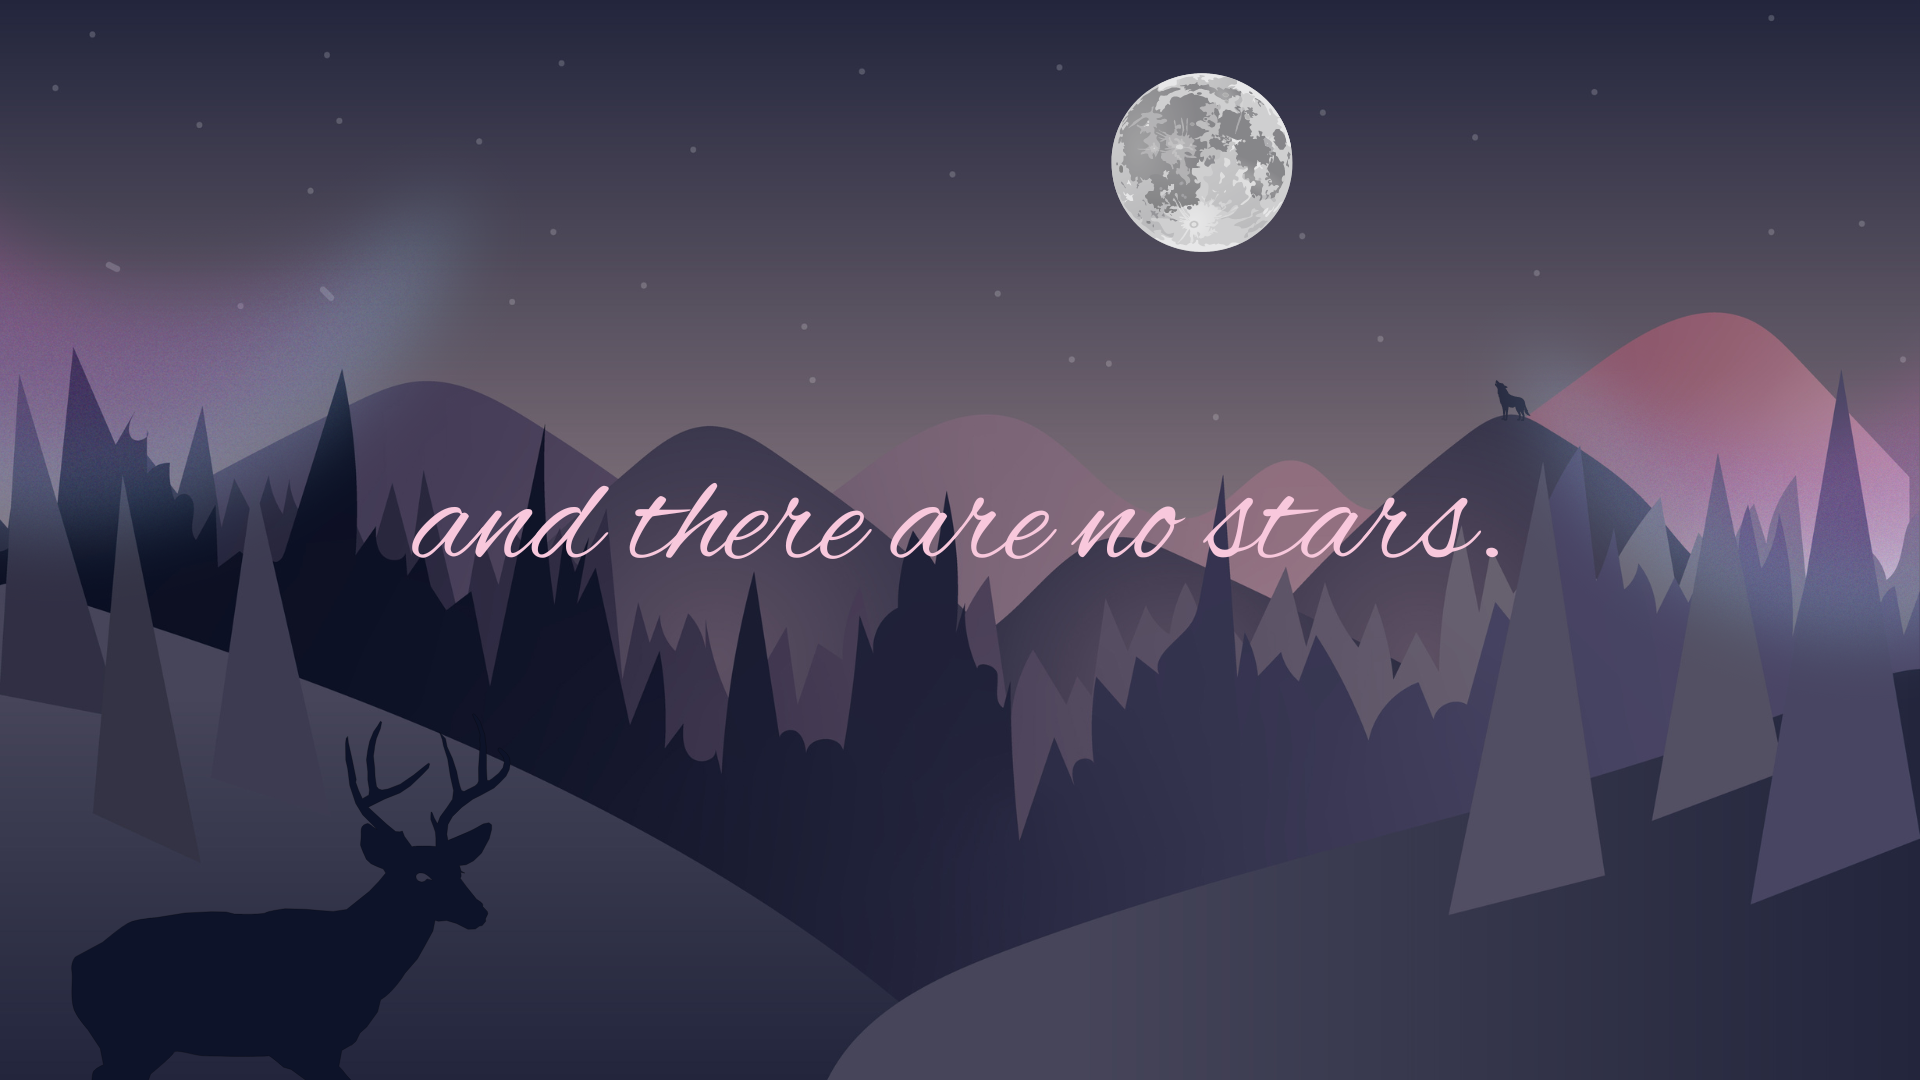 and there are no stars.